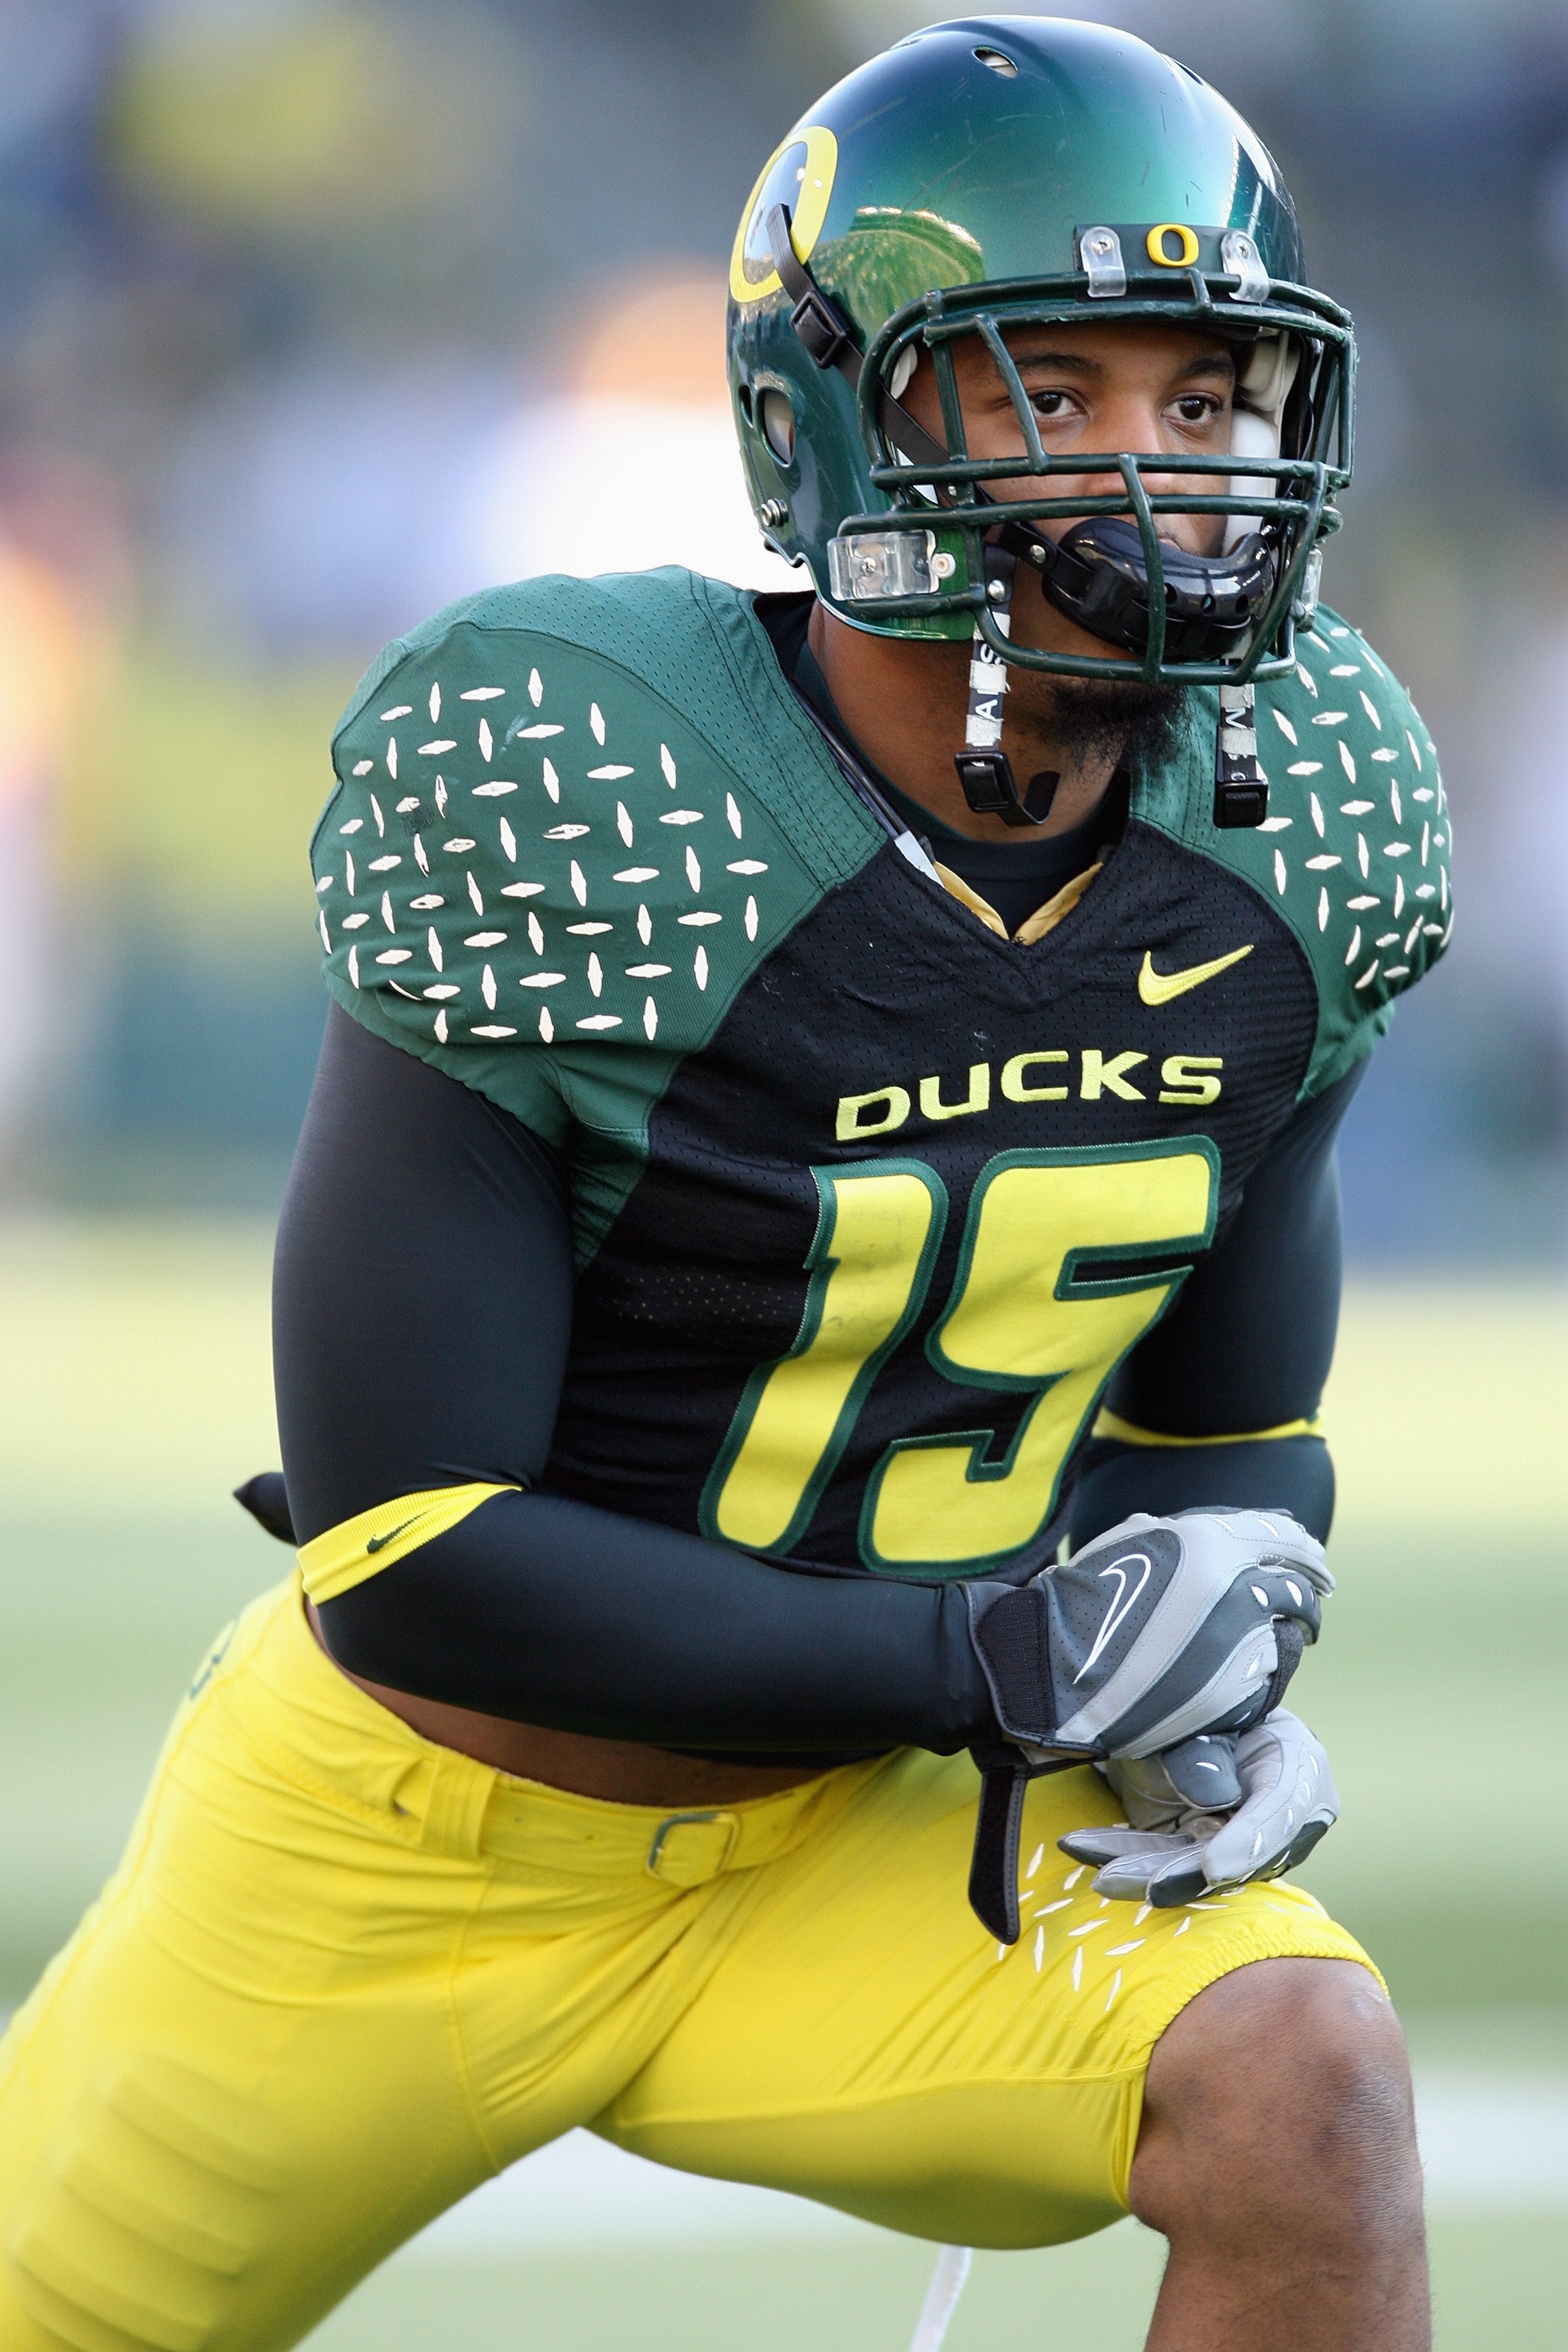 Patrick Chung of the Oregon Ducks stretches before a game against the Arizona State Sun Devils in 2007. (Photo by Otto Greule Jr/Getty Images)